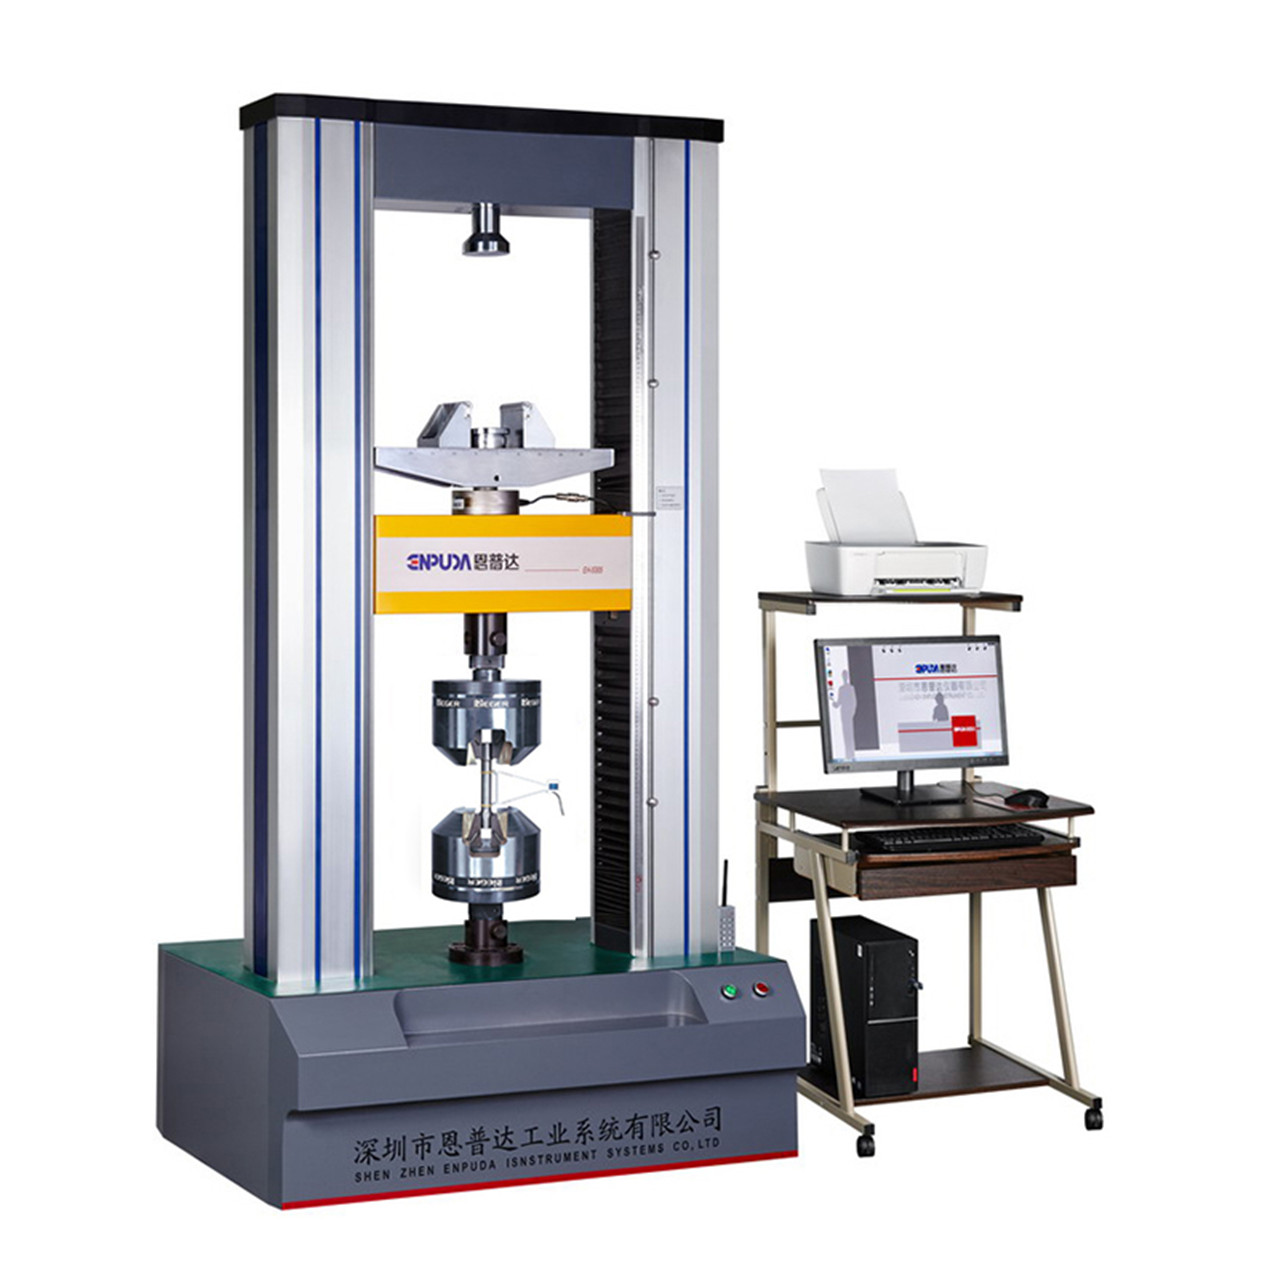 https://www.ded-instrument.com/High-and-lew-temperature-electronic-universal-testing-machine-product/